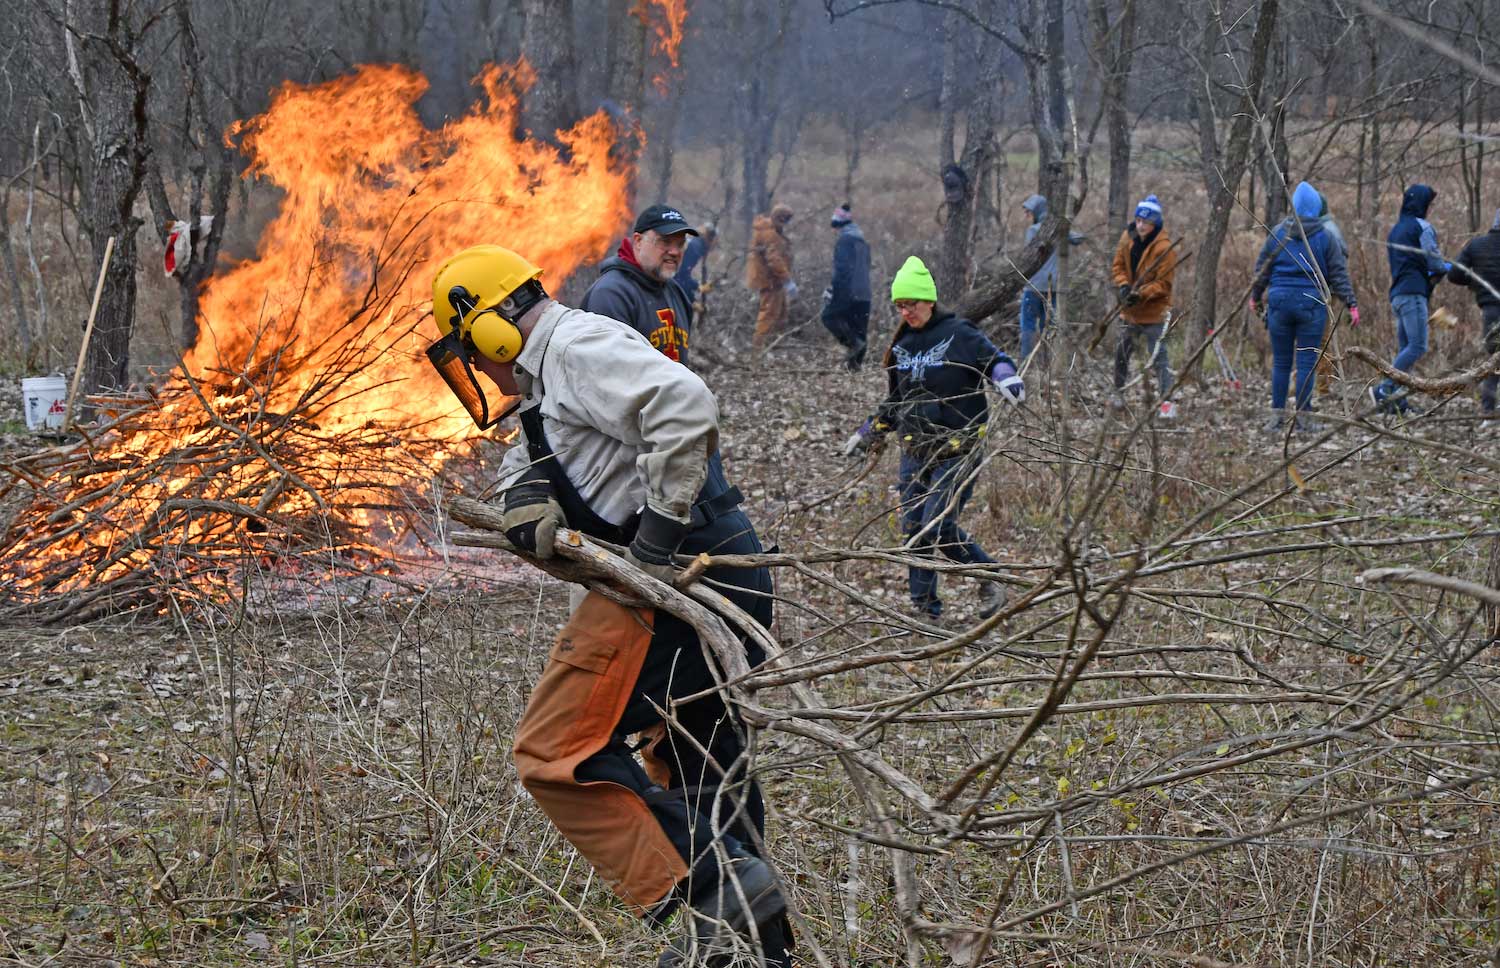 A person hauling branches while a brush pile burns in the background.